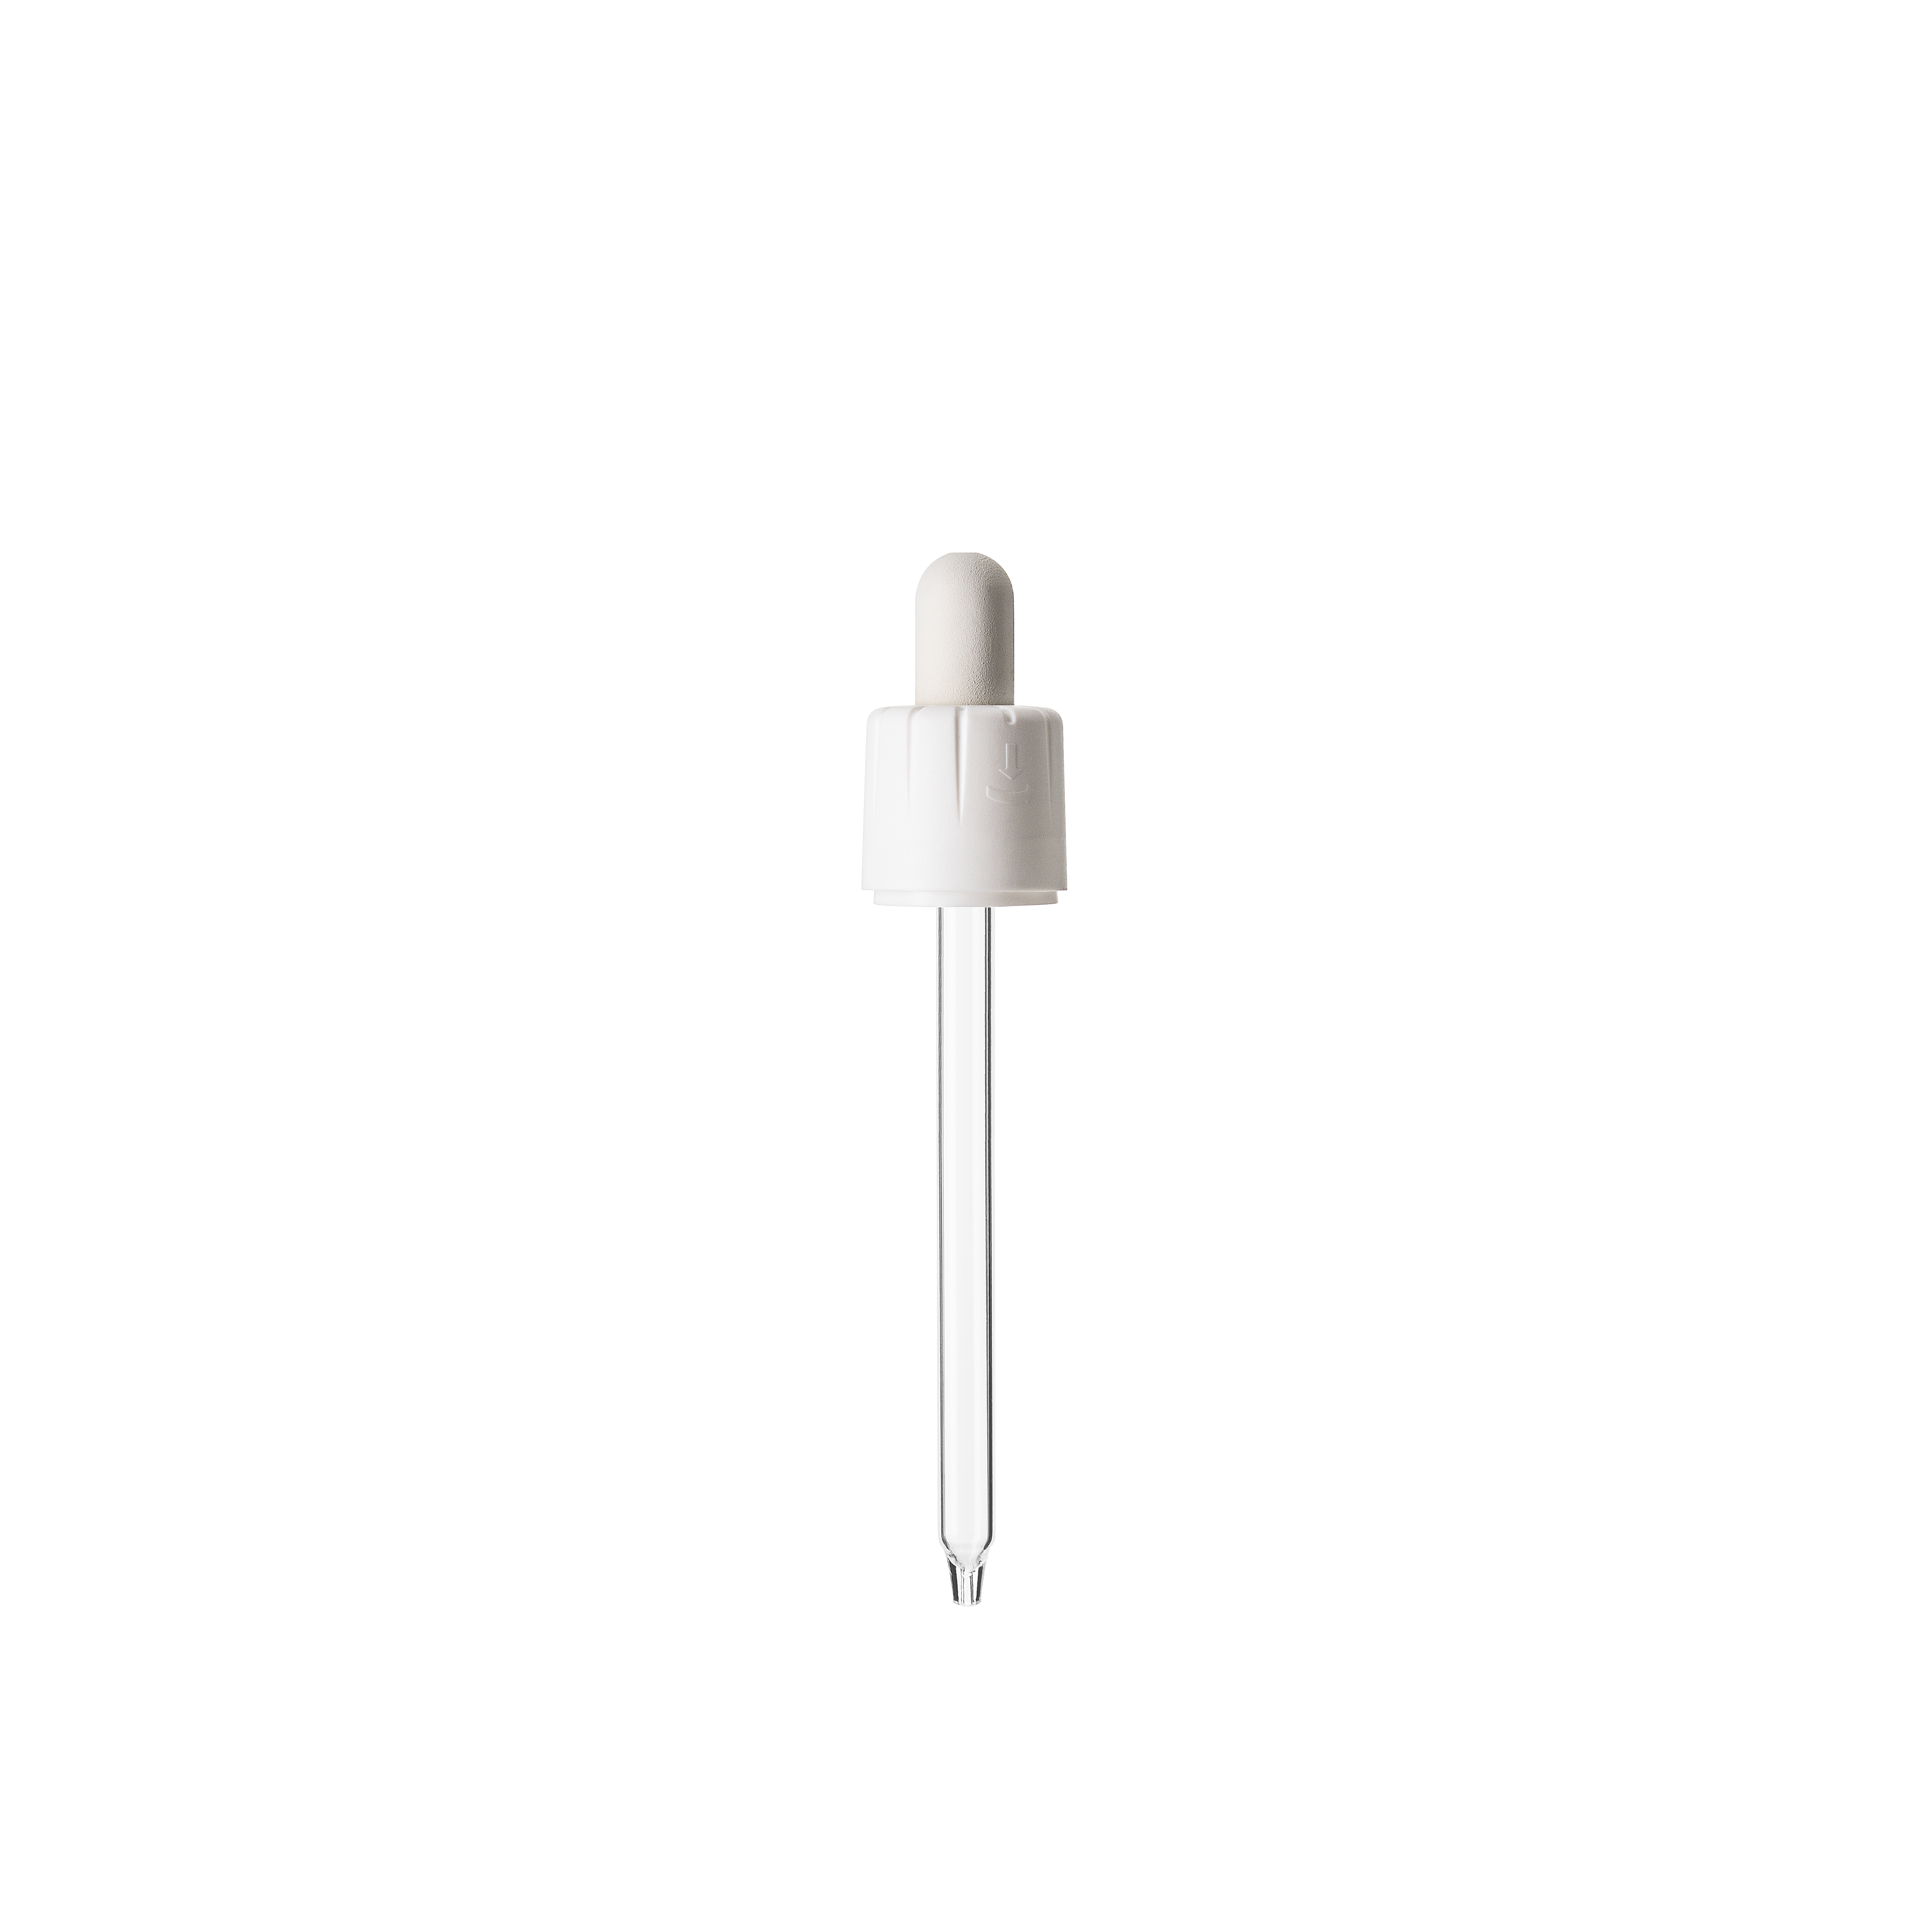 Child-resistant pipette series II, DIN18, tamper-evident, PP/PEHD, white, fine ribbed, white bulb NBR 1.0 ml, conical tip with 1.0 opening for Ginger 100 ml